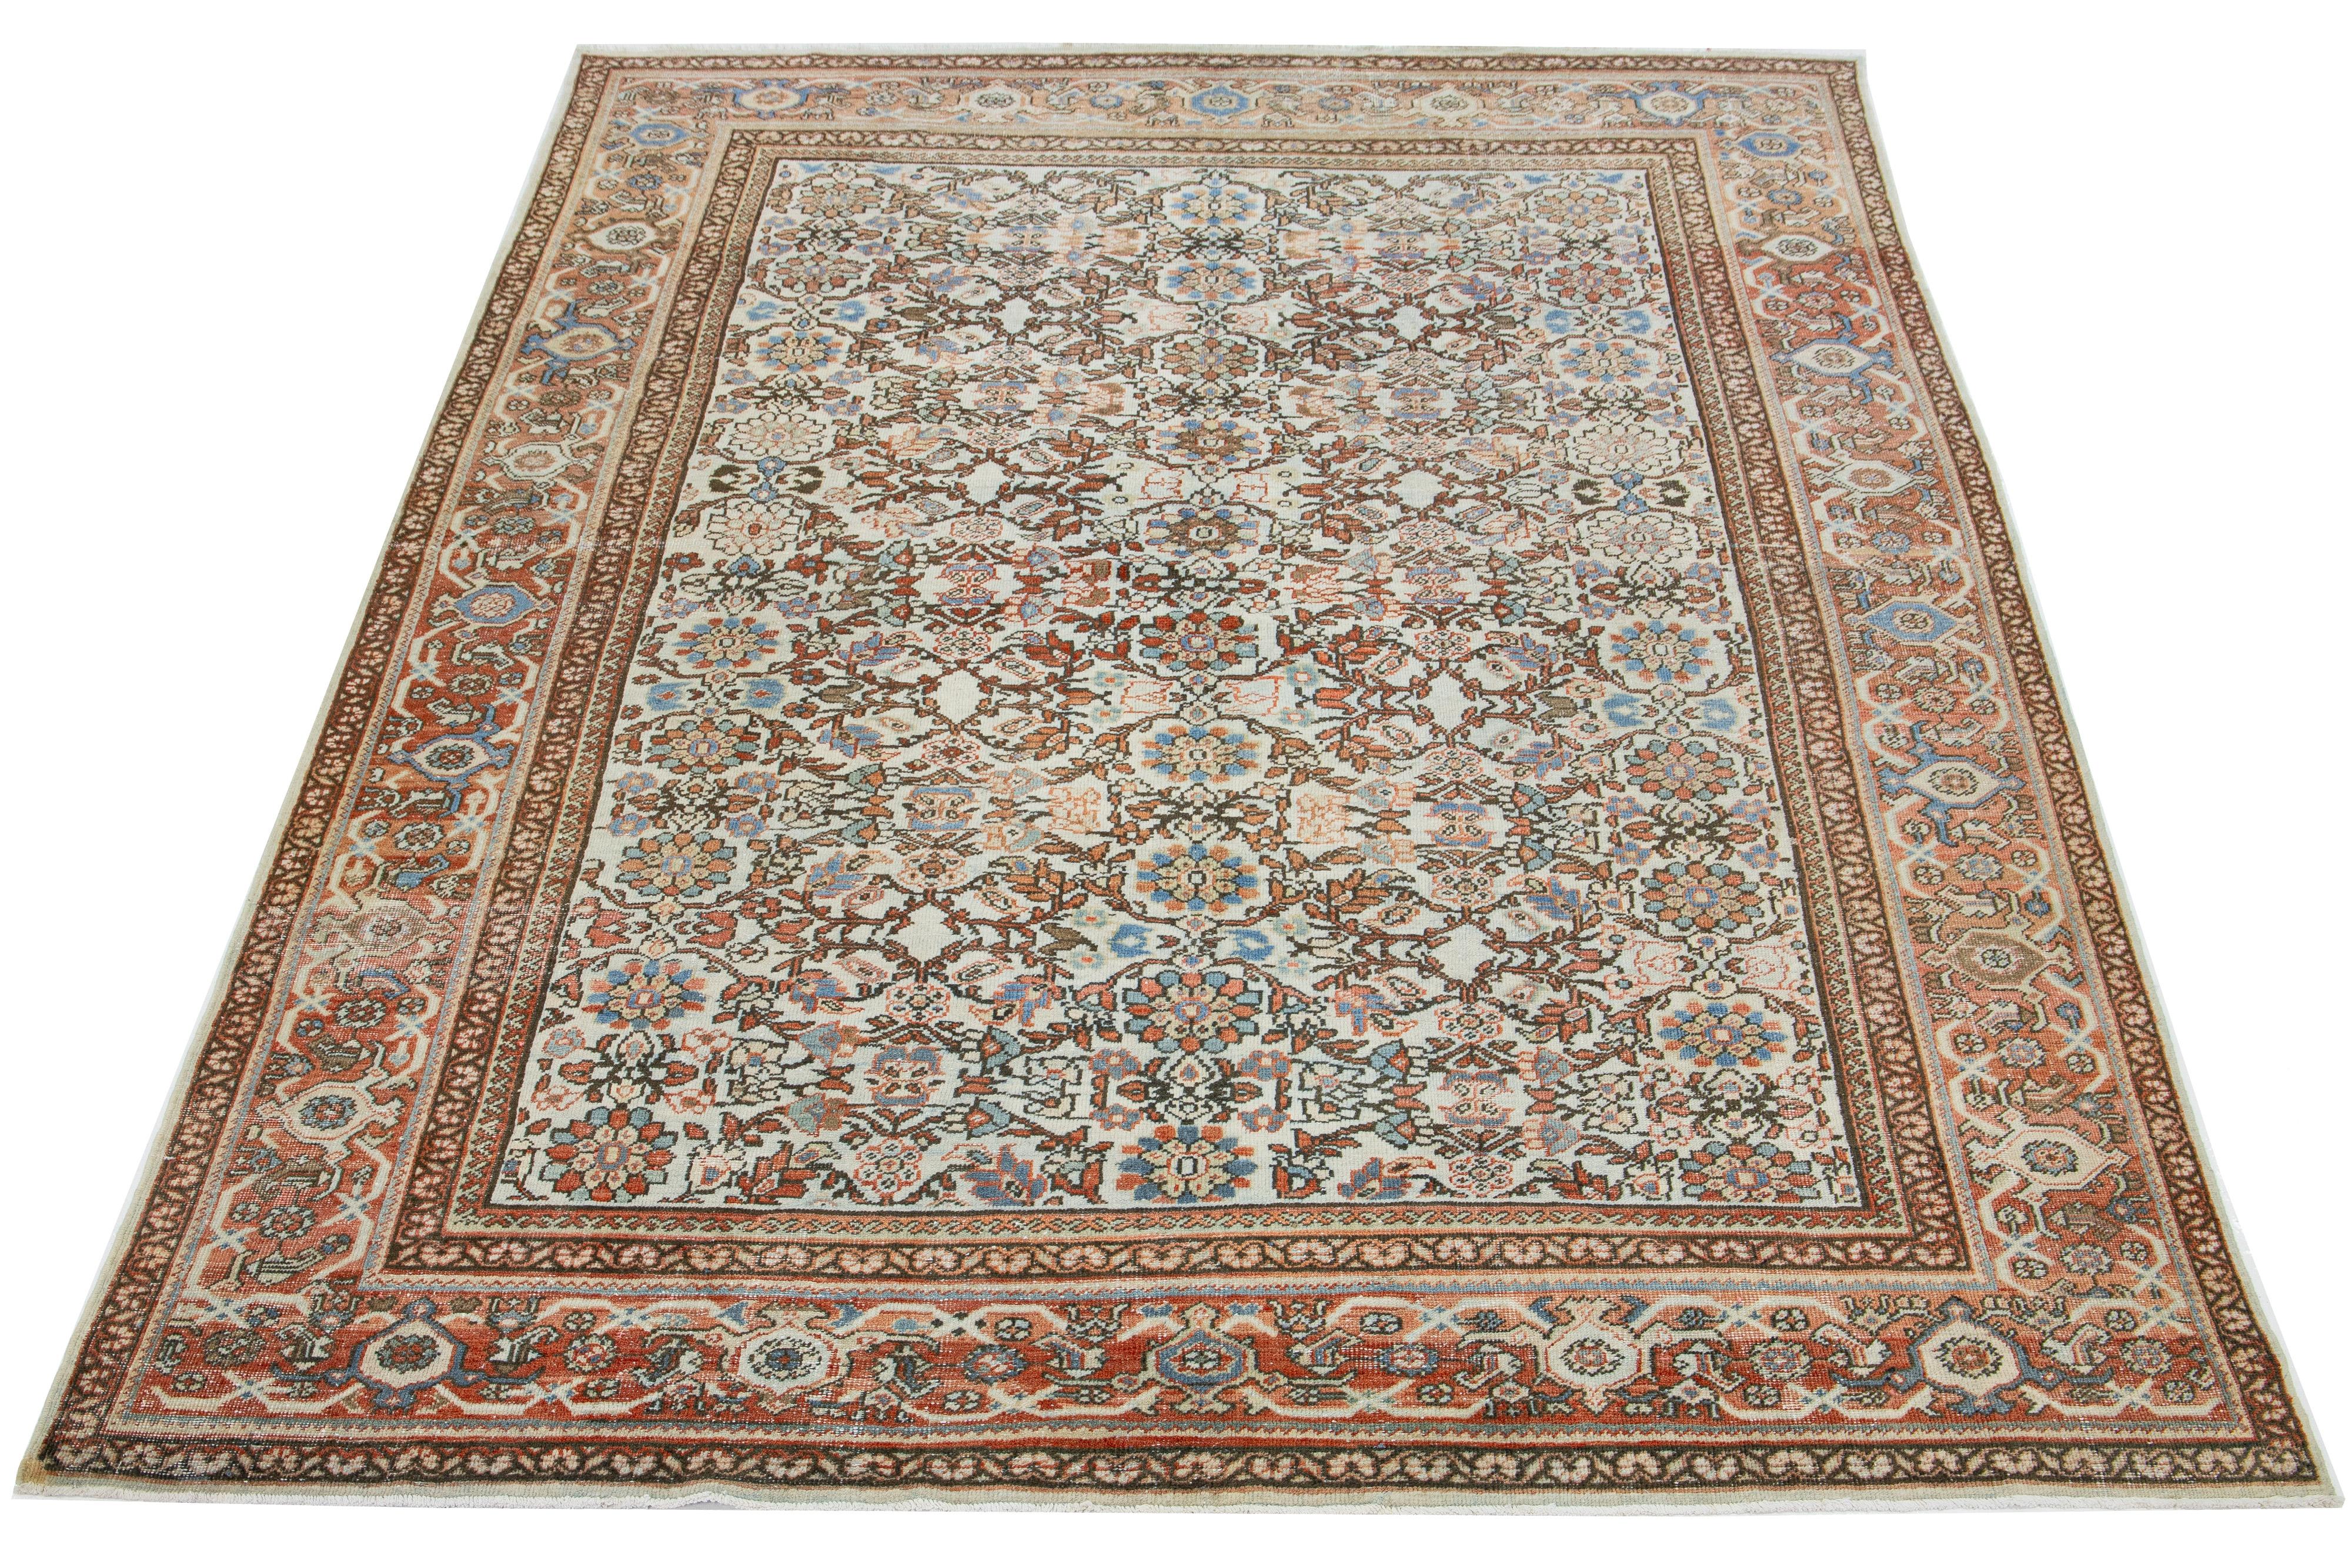 This vintage Persian Mahal wool rug features a beige background and multicolored floral designs.

This rug measures 8'11